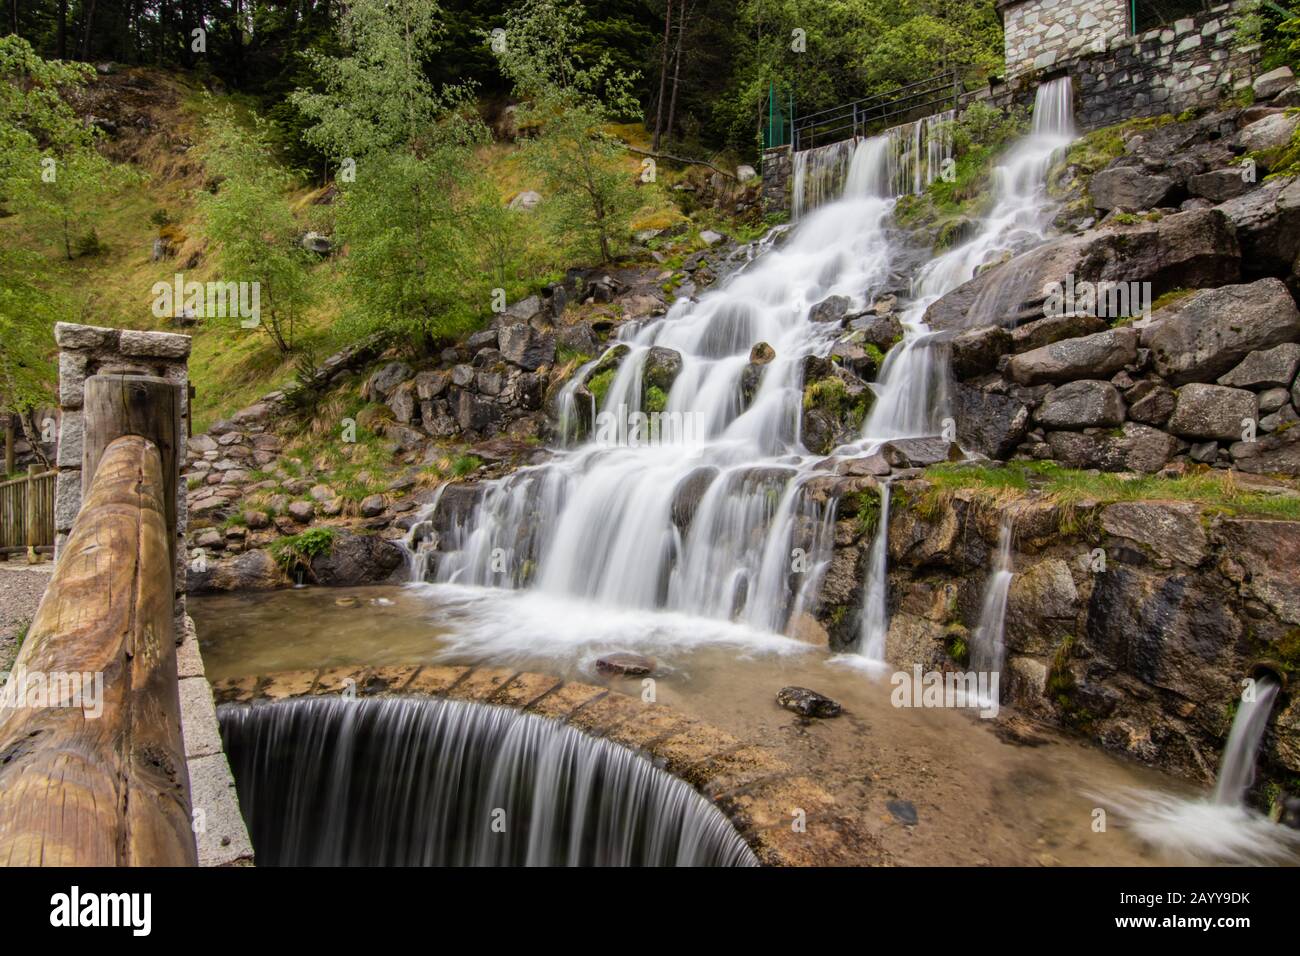 A View Of A Small Cascade Waterfall Near A Village Of Encamp Andorra Located In The Pyrenees Mountain Stock Photo Alamy